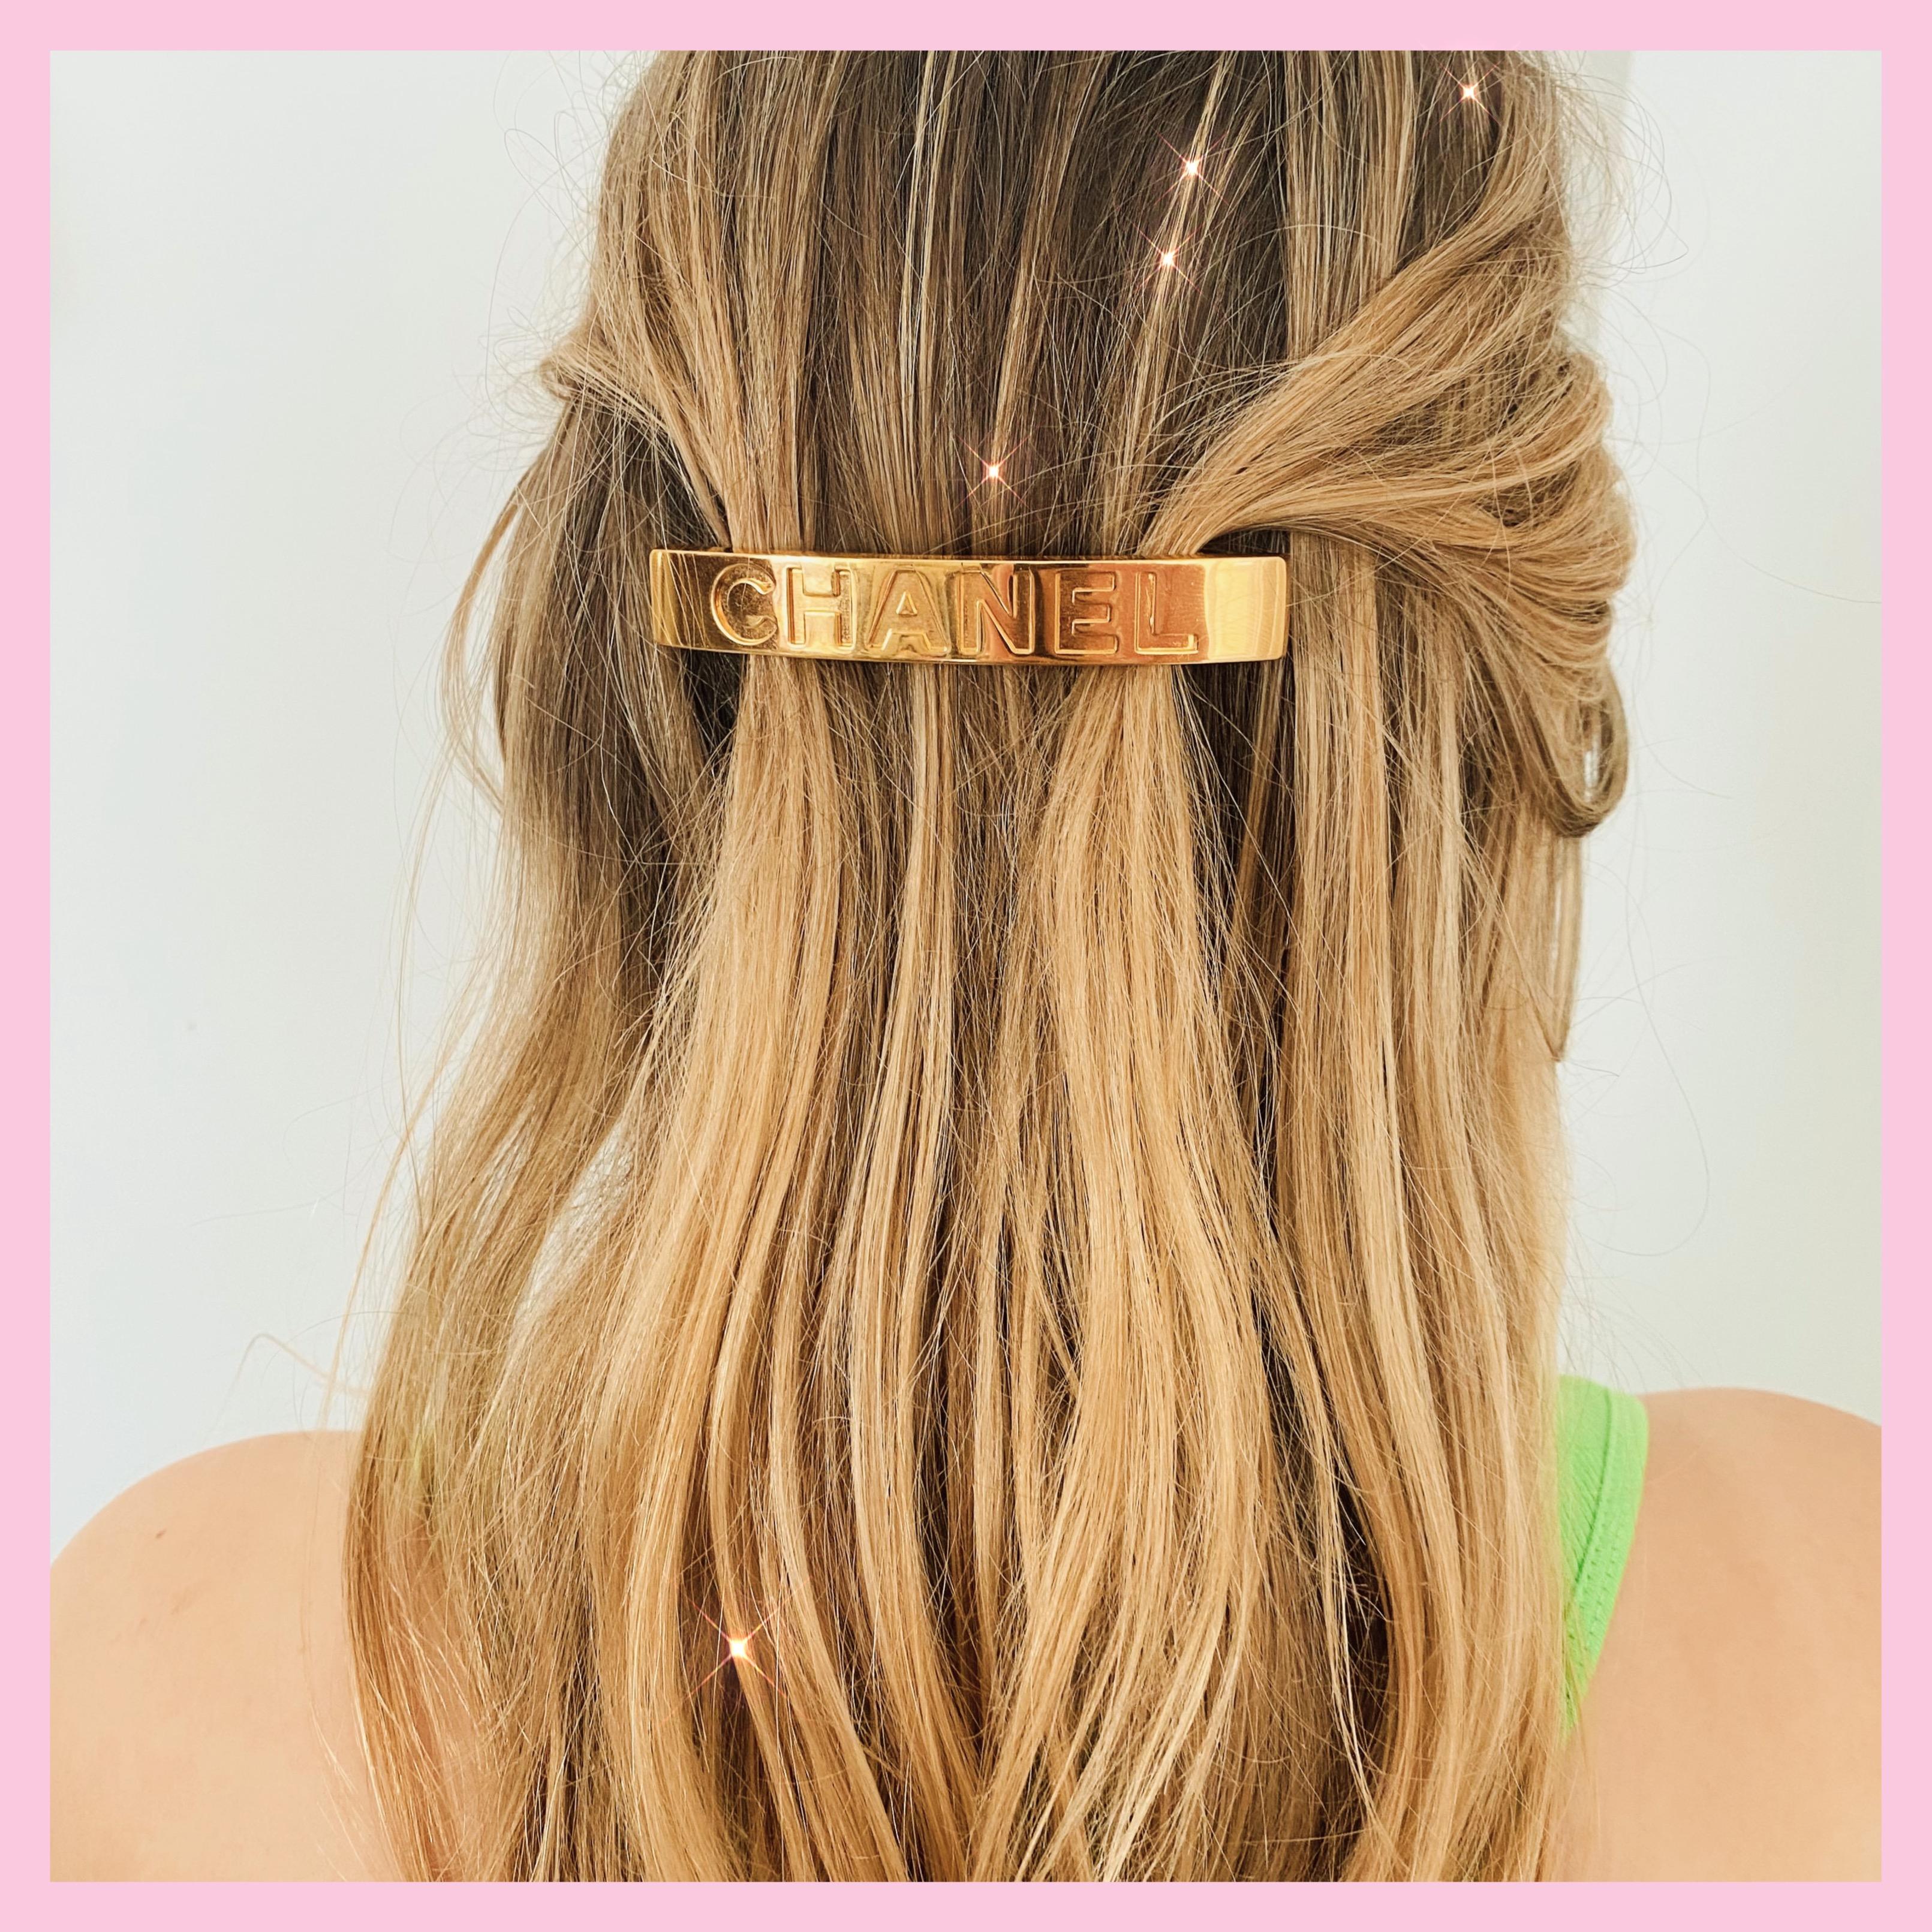 Chanel Vintage 1990s Hair Barrette

A rare and striking piece from the Chanel 90s archive. Add Chanel magic to good and bad hair days! Made in France in the 1990s from gold plated metal and embossed with Chanel across the barrette.

Chanel in the